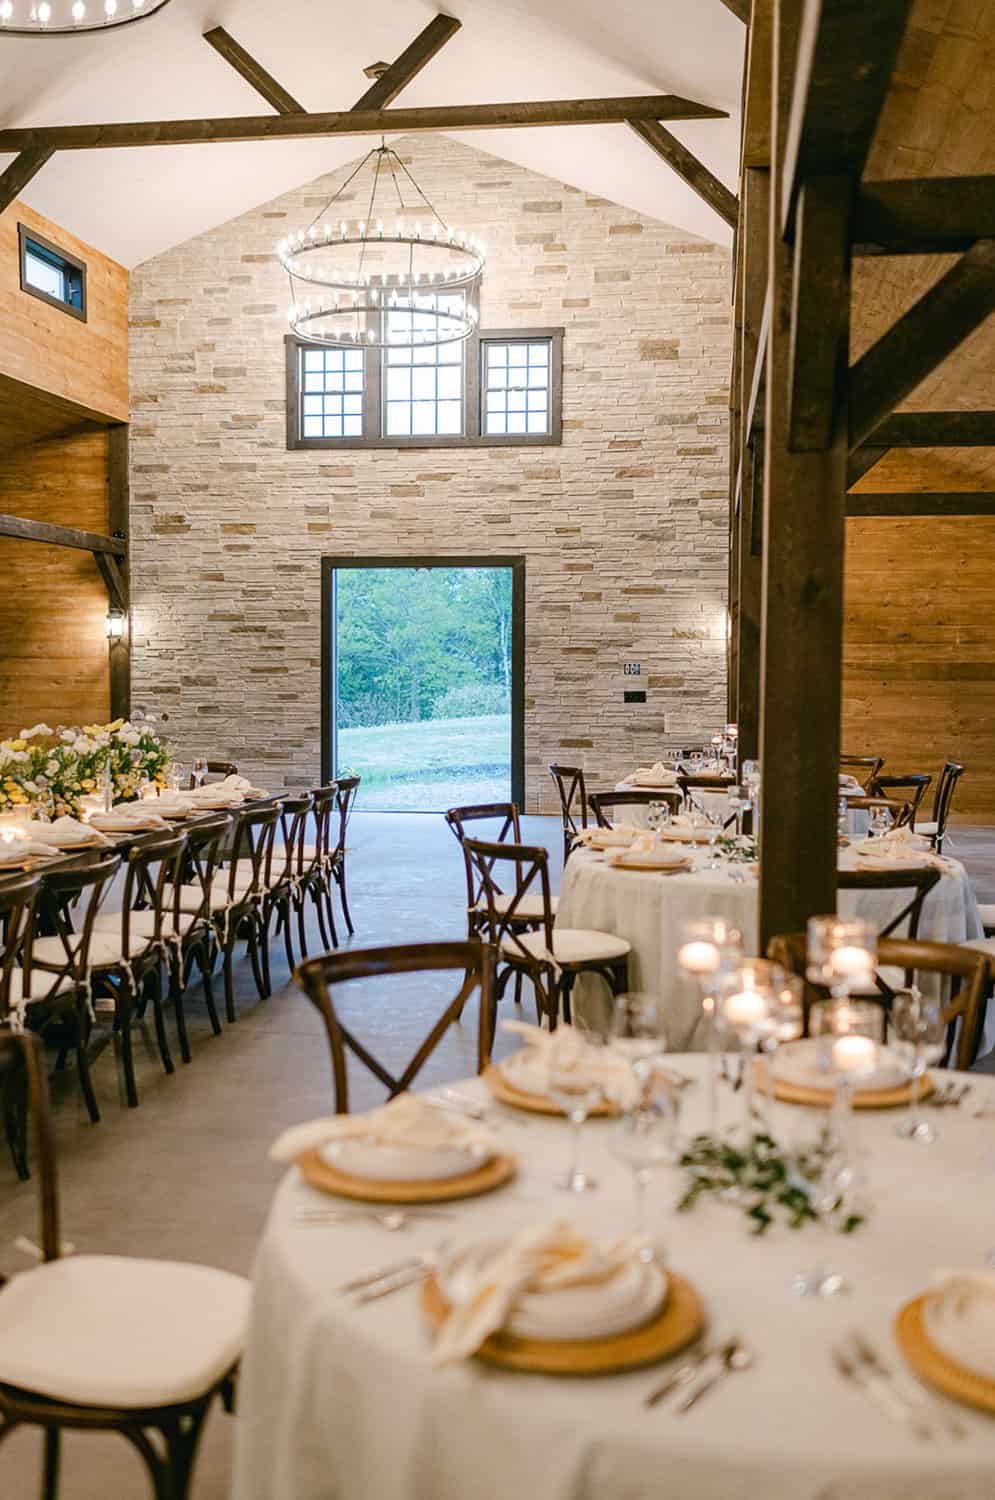 Rustic dining hall with round tables, white linen, wooden chairs, lit candles, stone walls, and wooden beams.